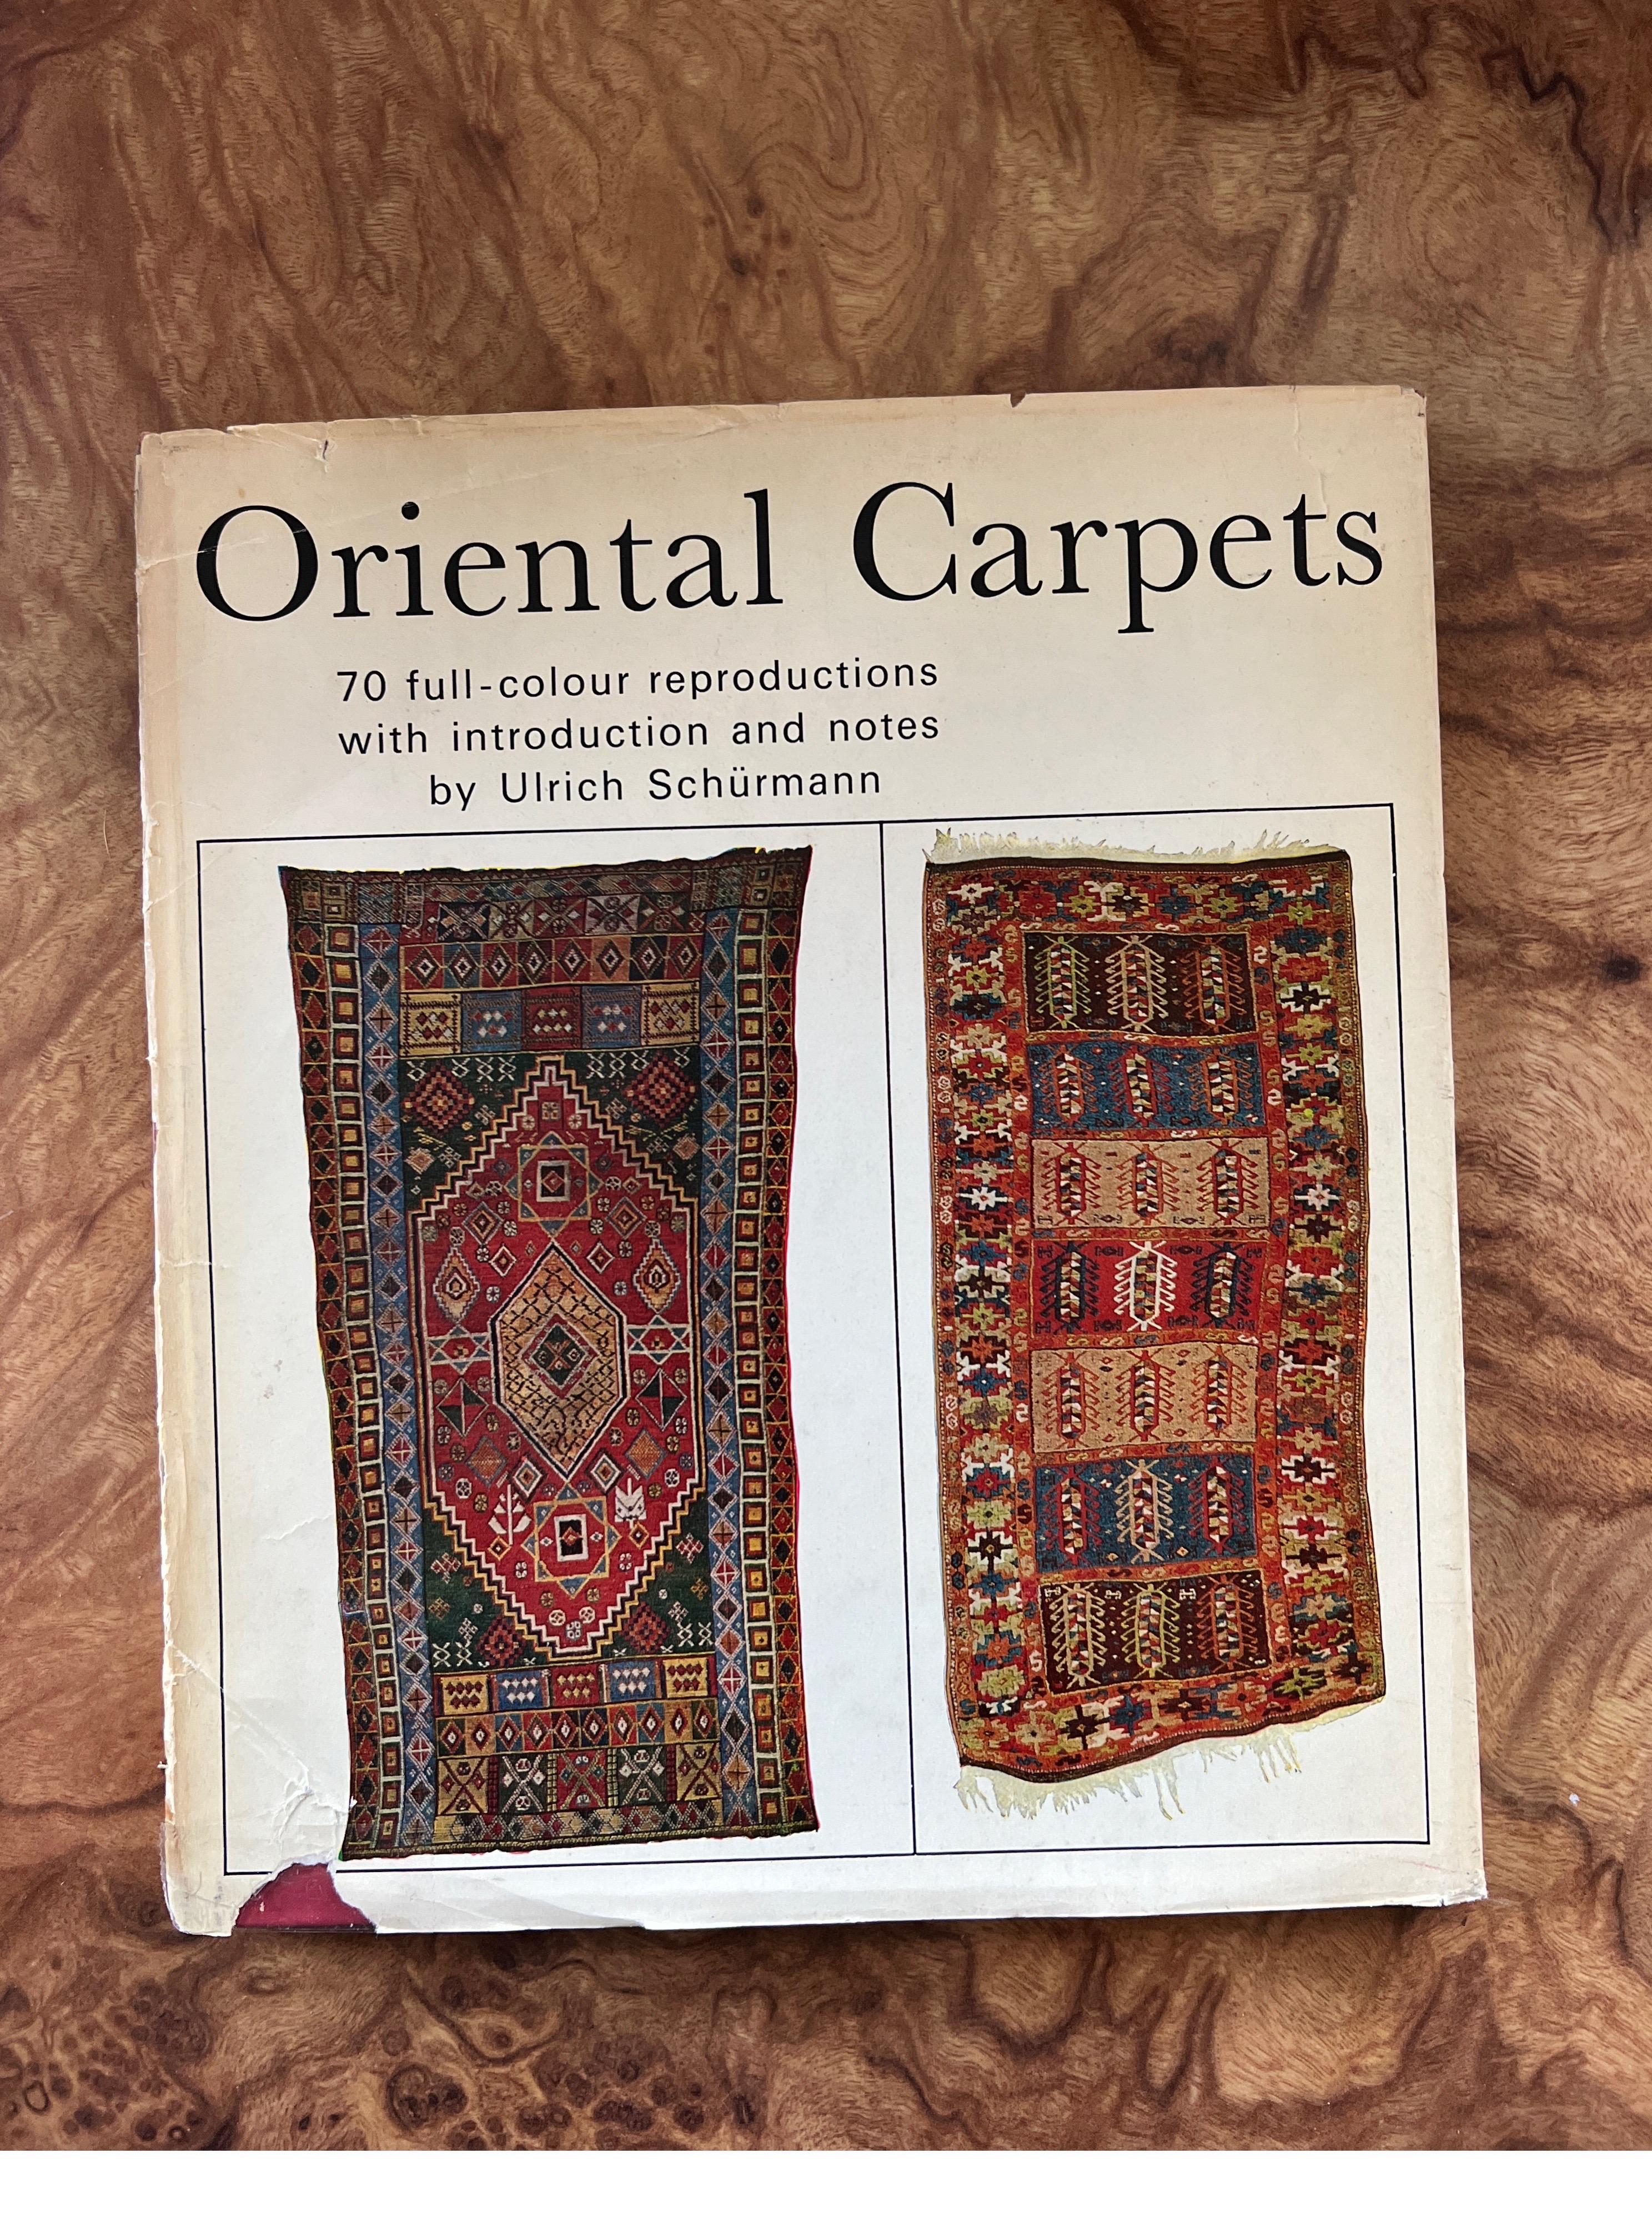 An exquisite vintage look at the different types of handwoven carpets and rugs that have captured interior design through the ages. Book jacket has some wear, book and pages still in tact and good condition. 

9.5” x 11”